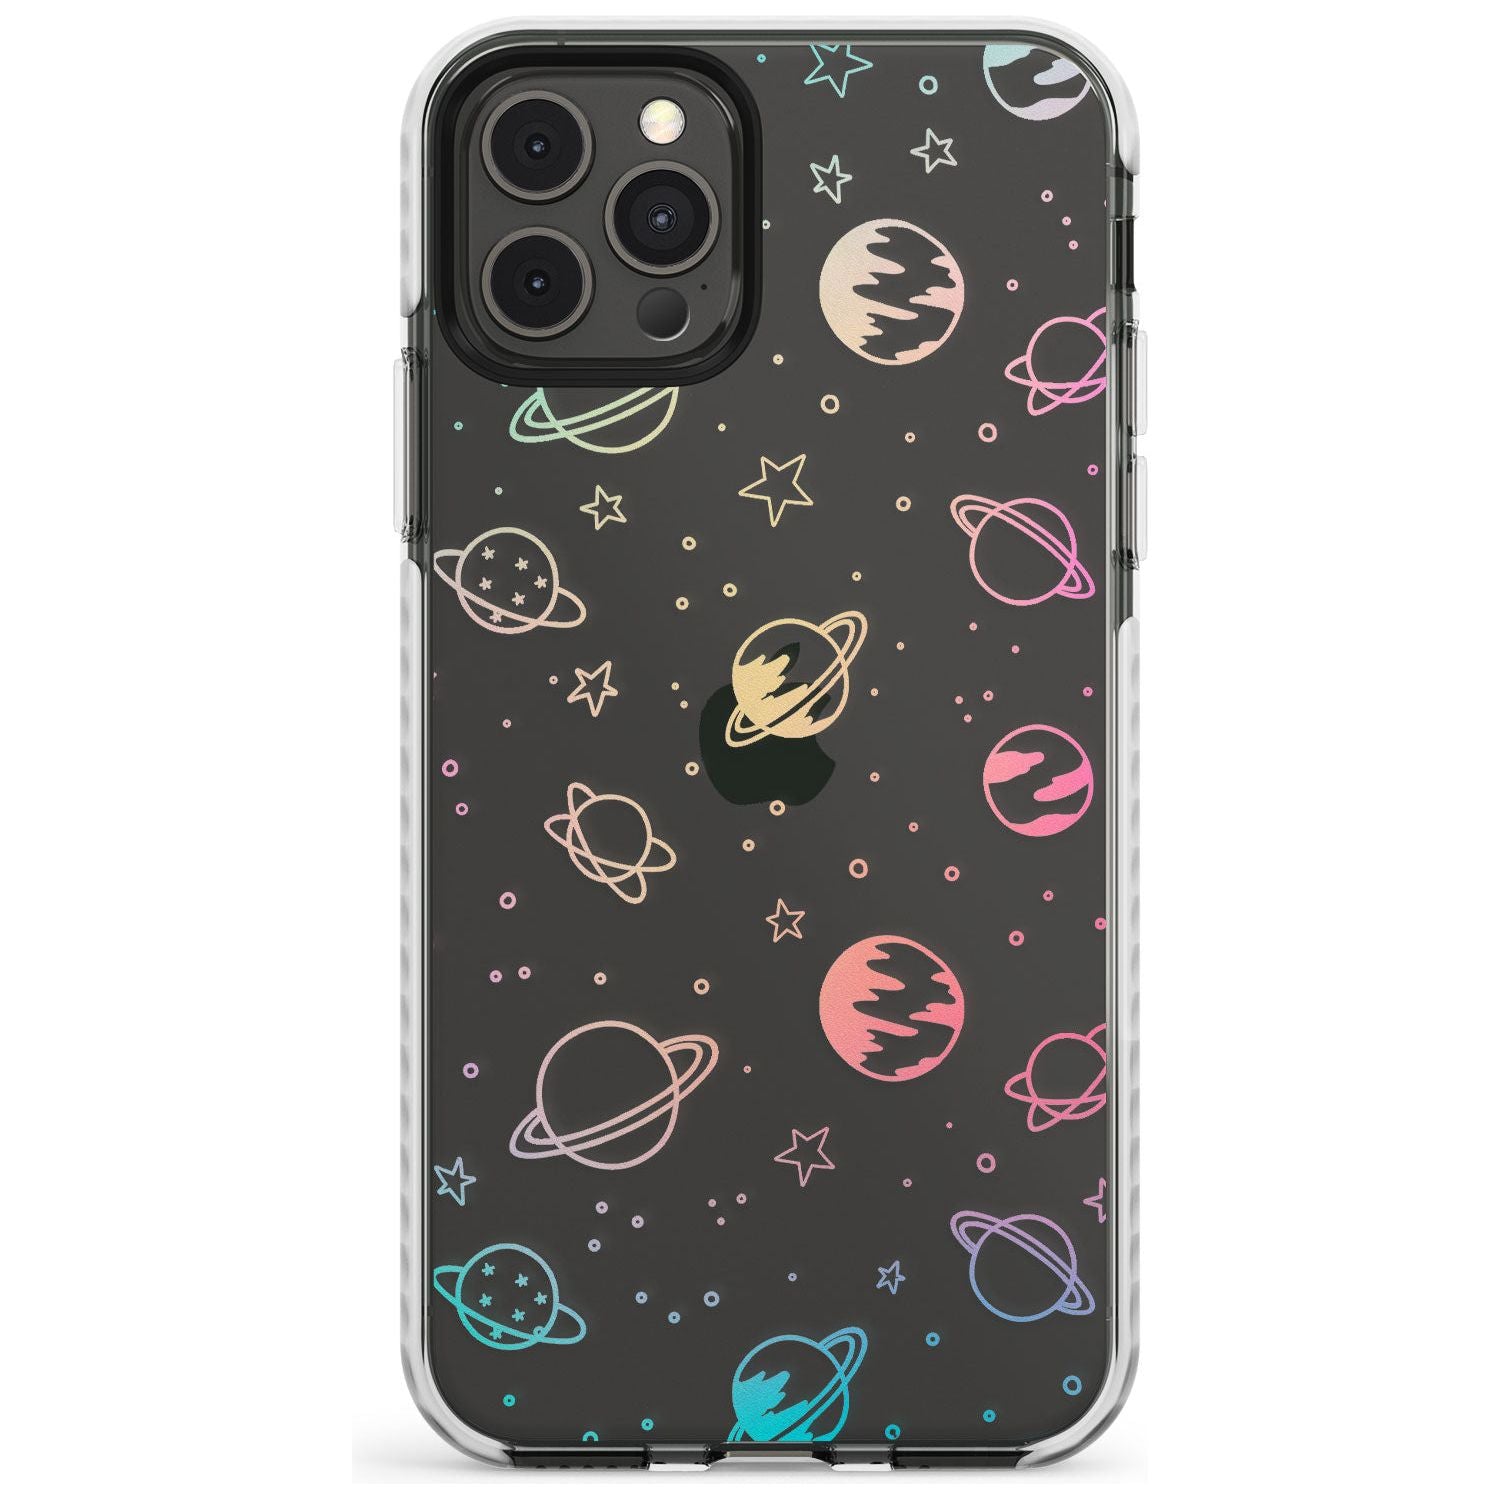 Outer Space Outlines: Pastels on Clear Slim TPU Phone Case for iPhone 11 Pro Max